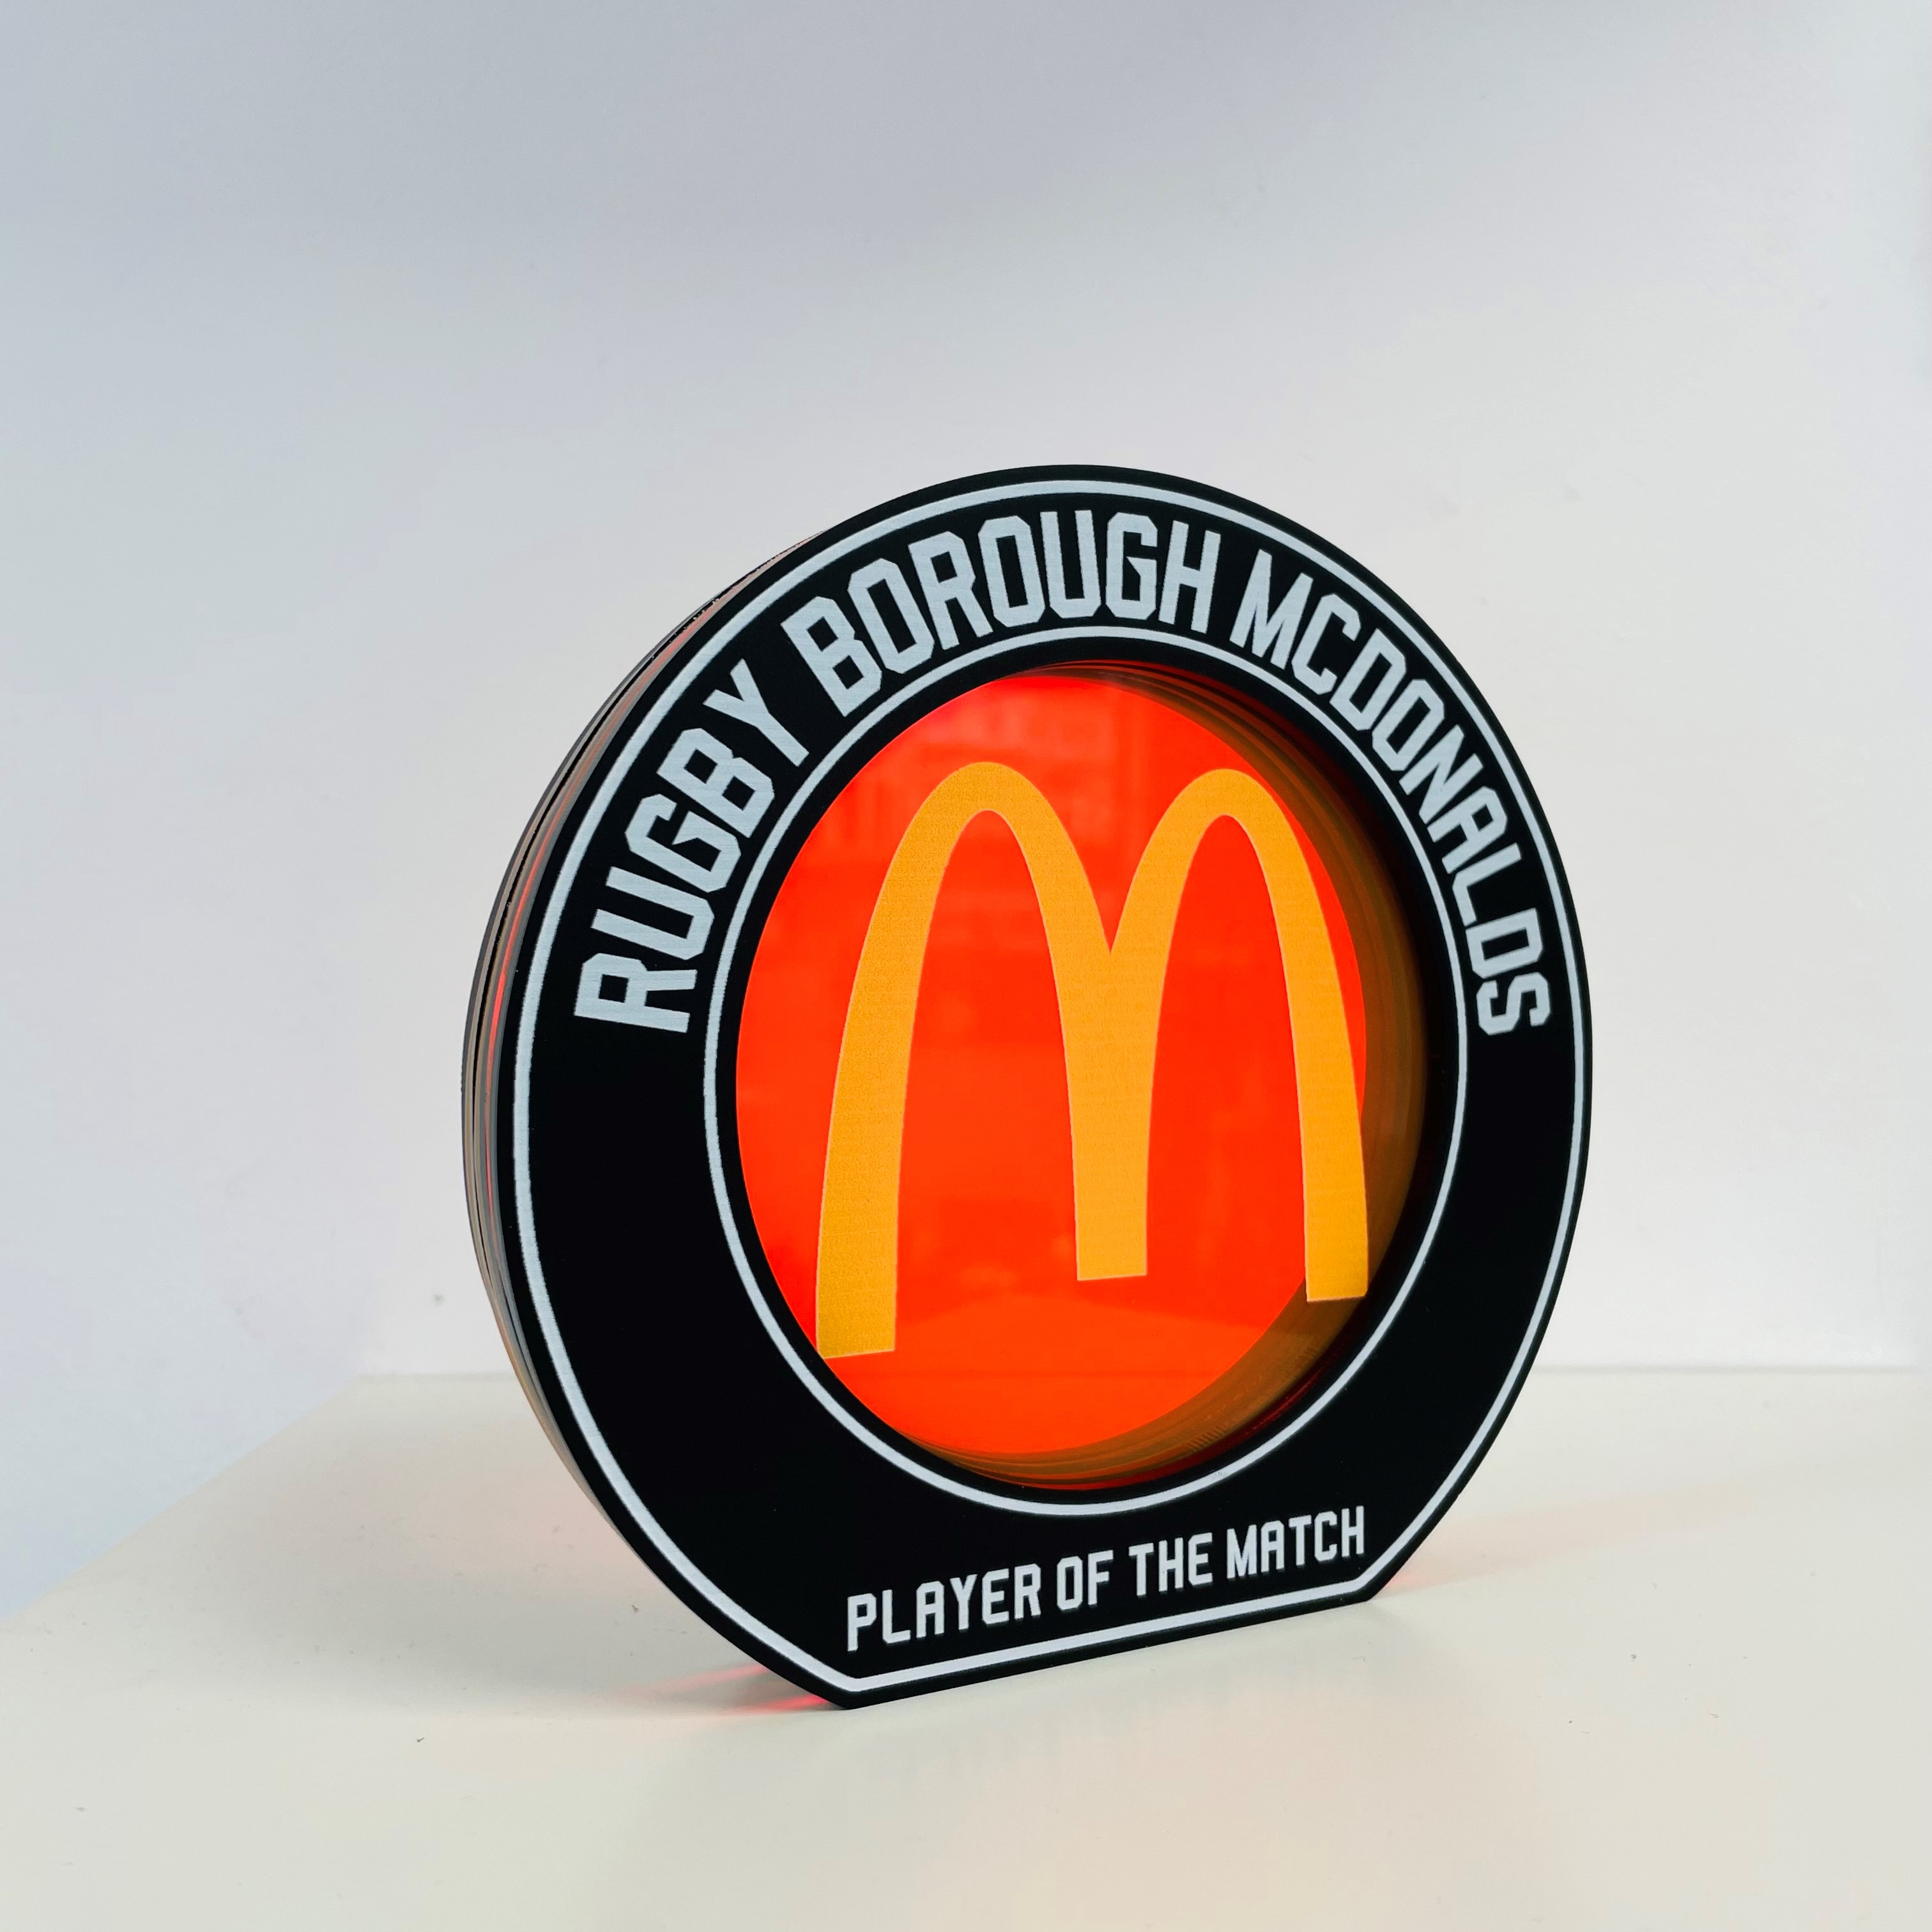 Rugby Borough Mcdonald's Player of the Match